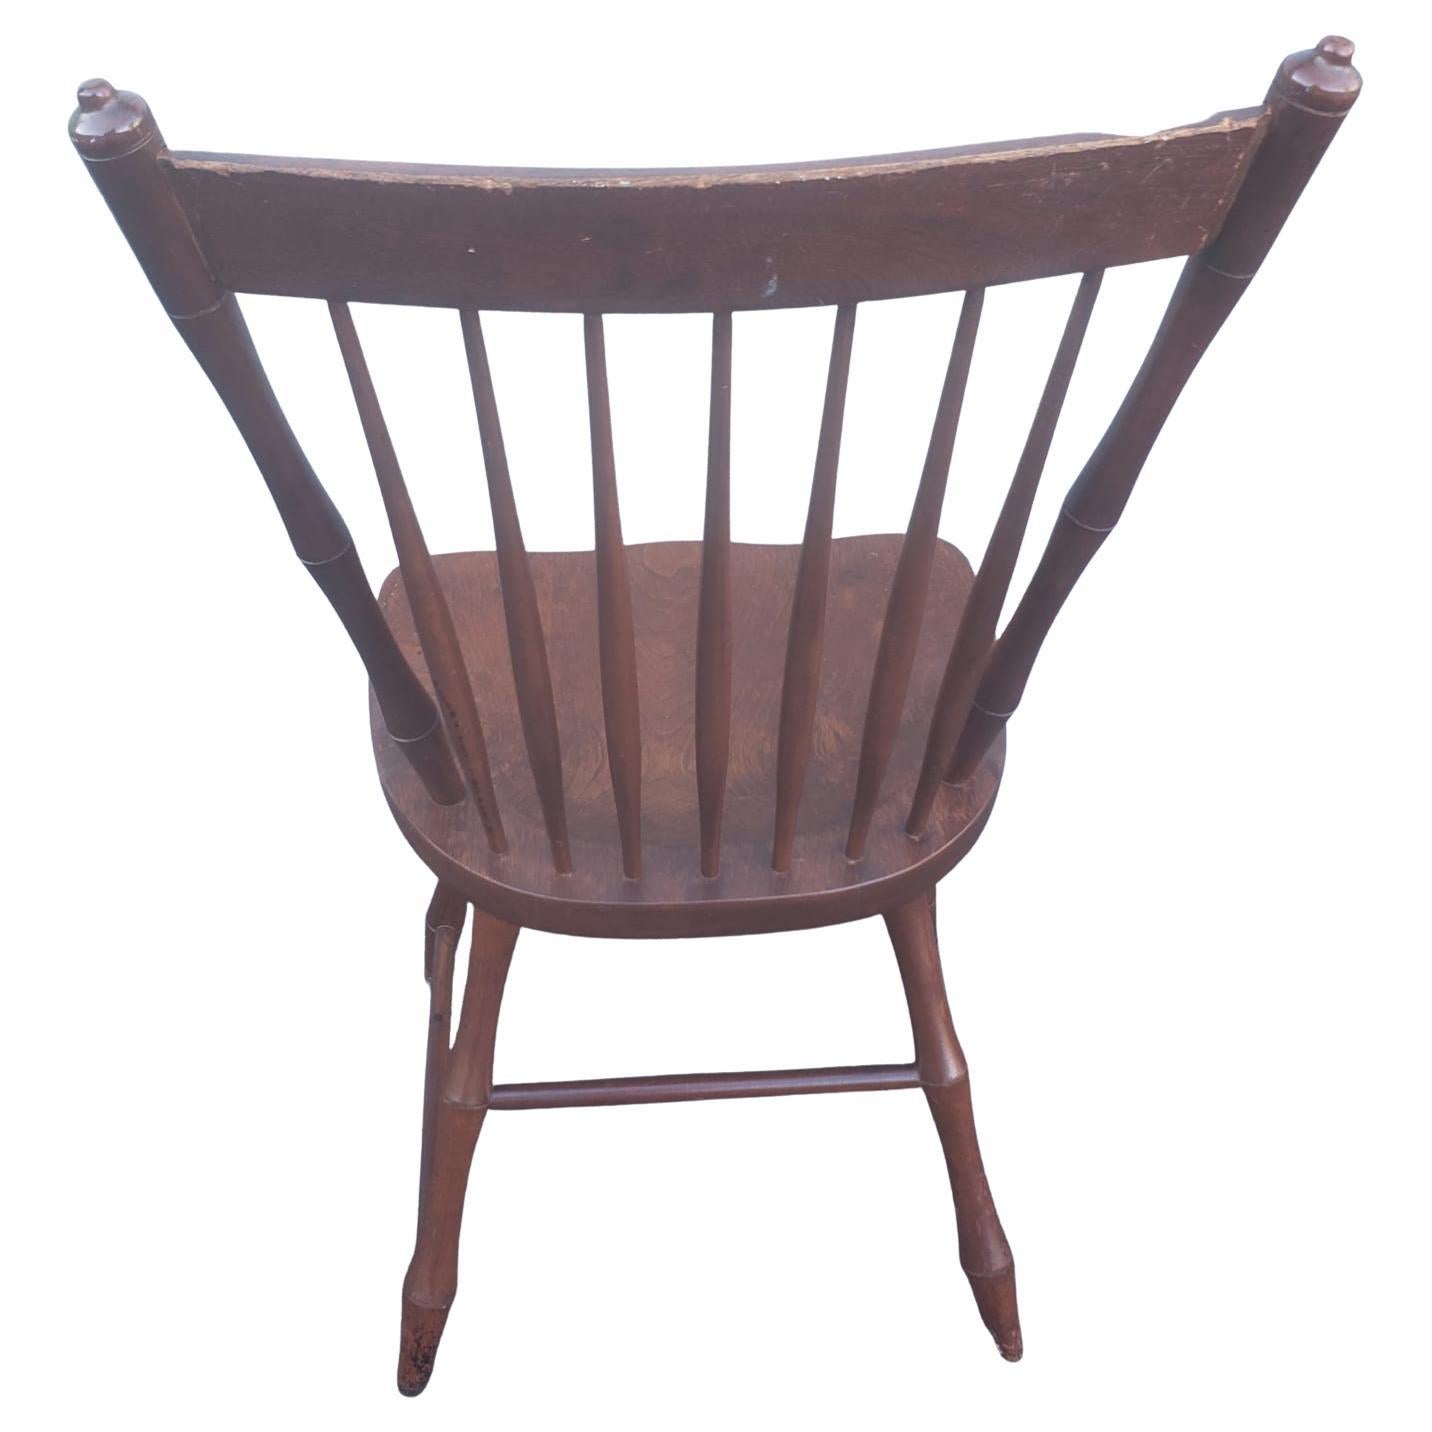 American Antique Faux Bamboo Cherry Windsor Chair by Harden, Circa 1800s